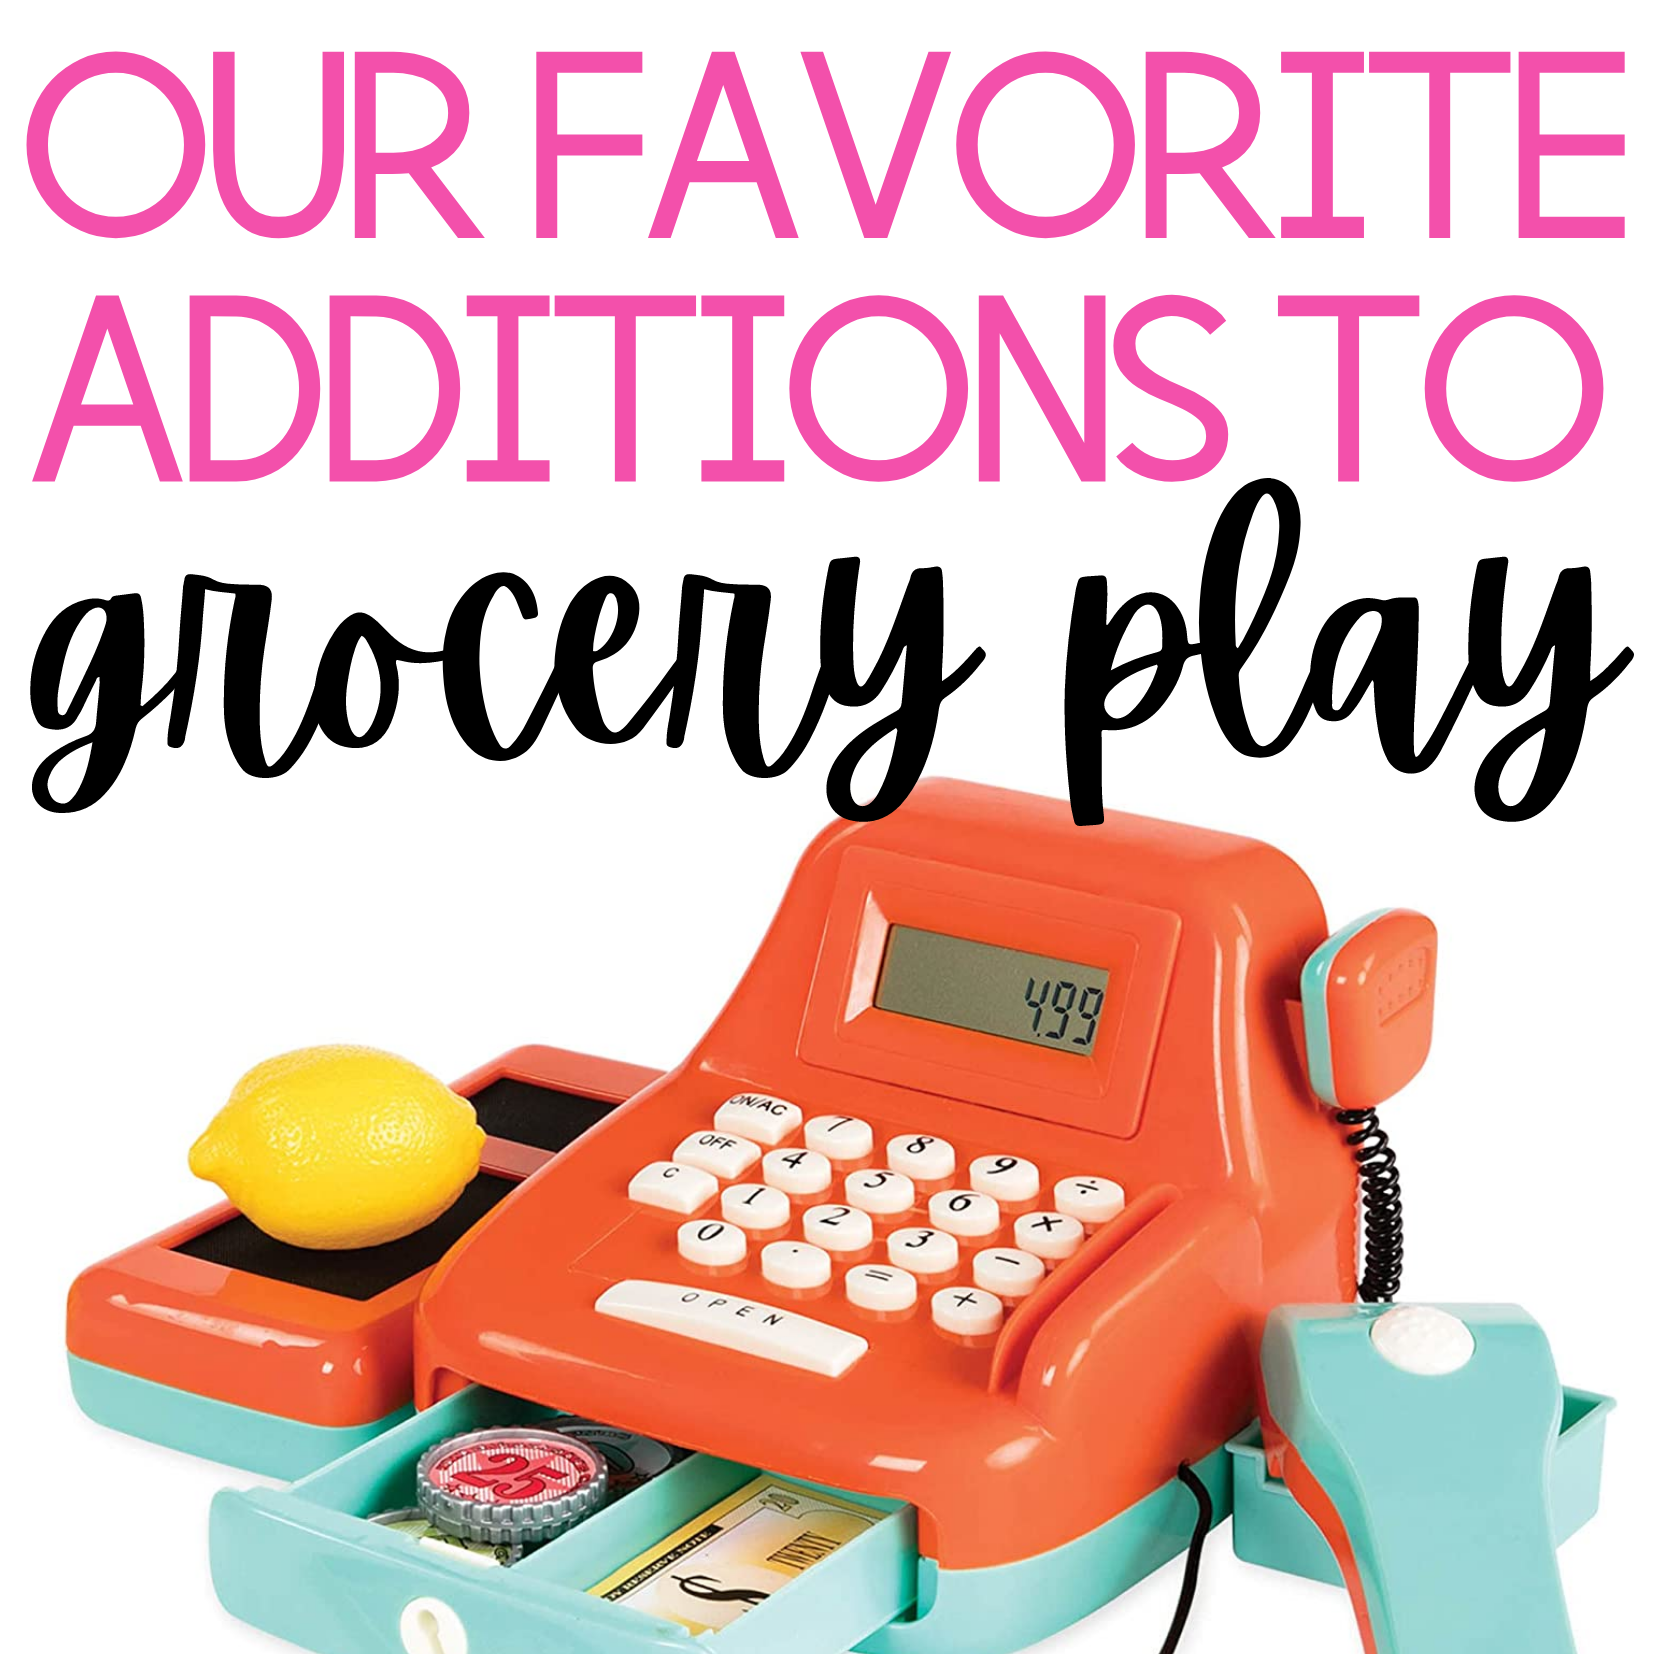 Our Favorite Additions to Grocery Store Dramatic Play